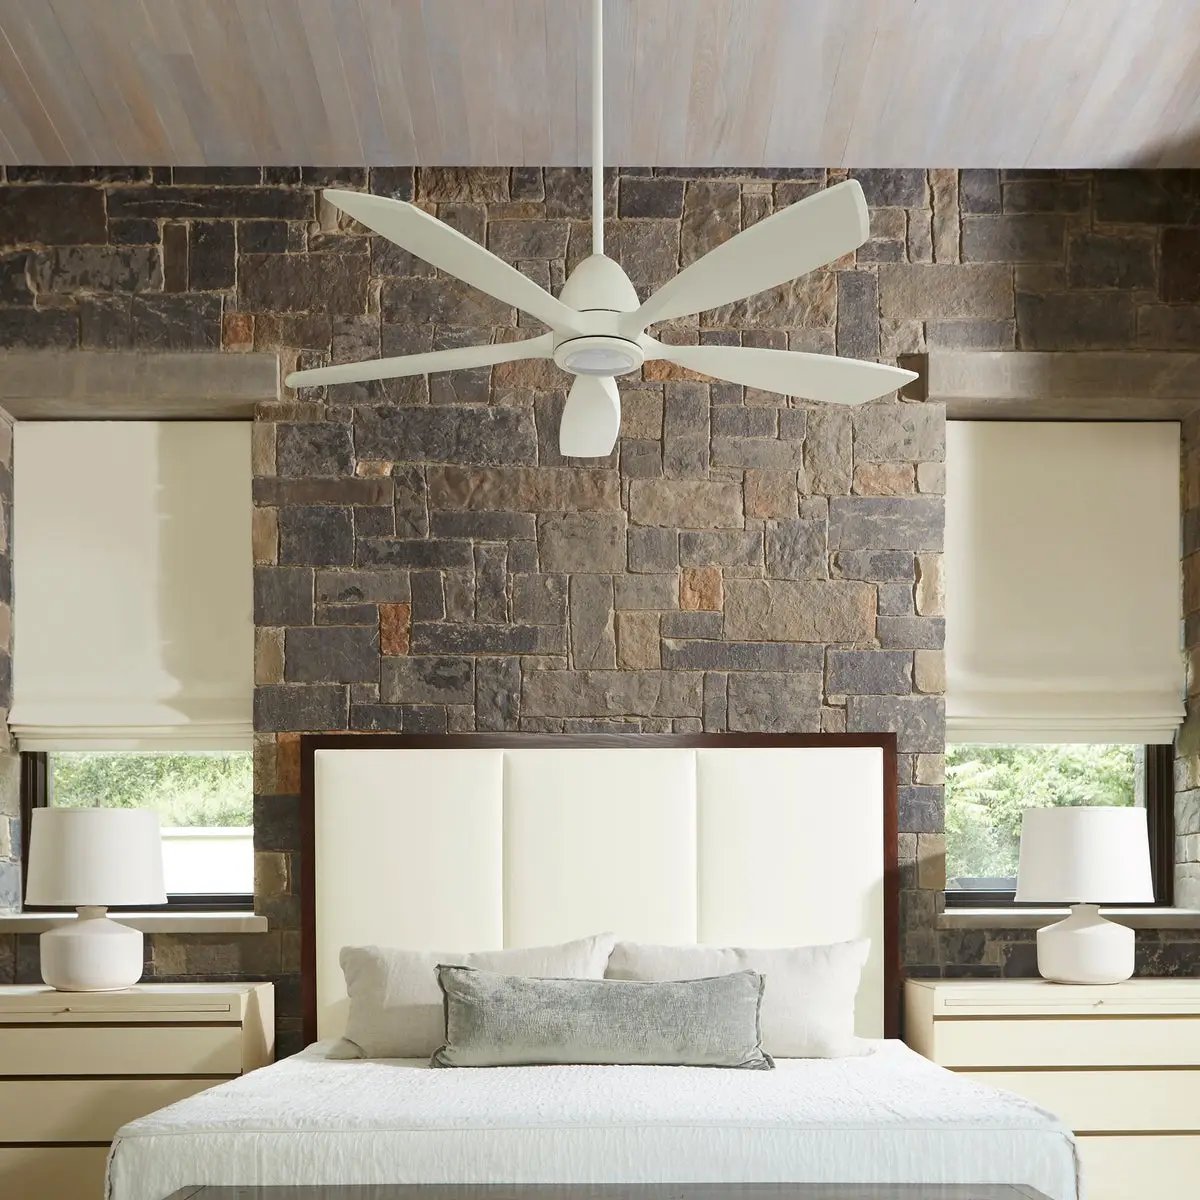 Contemporary Ceiling Fan with Light in a Bedroom, featuring a gentle twist design and soft lines. 56-inch blades with a 16-degree pitch and 6-speed DC motor. Integrated LED lighting for added comfort. Oiled Bronze, Satin Nickel, or Studio White finish. UL Listed for Dry Locations. Limited Lifetime Warranty.